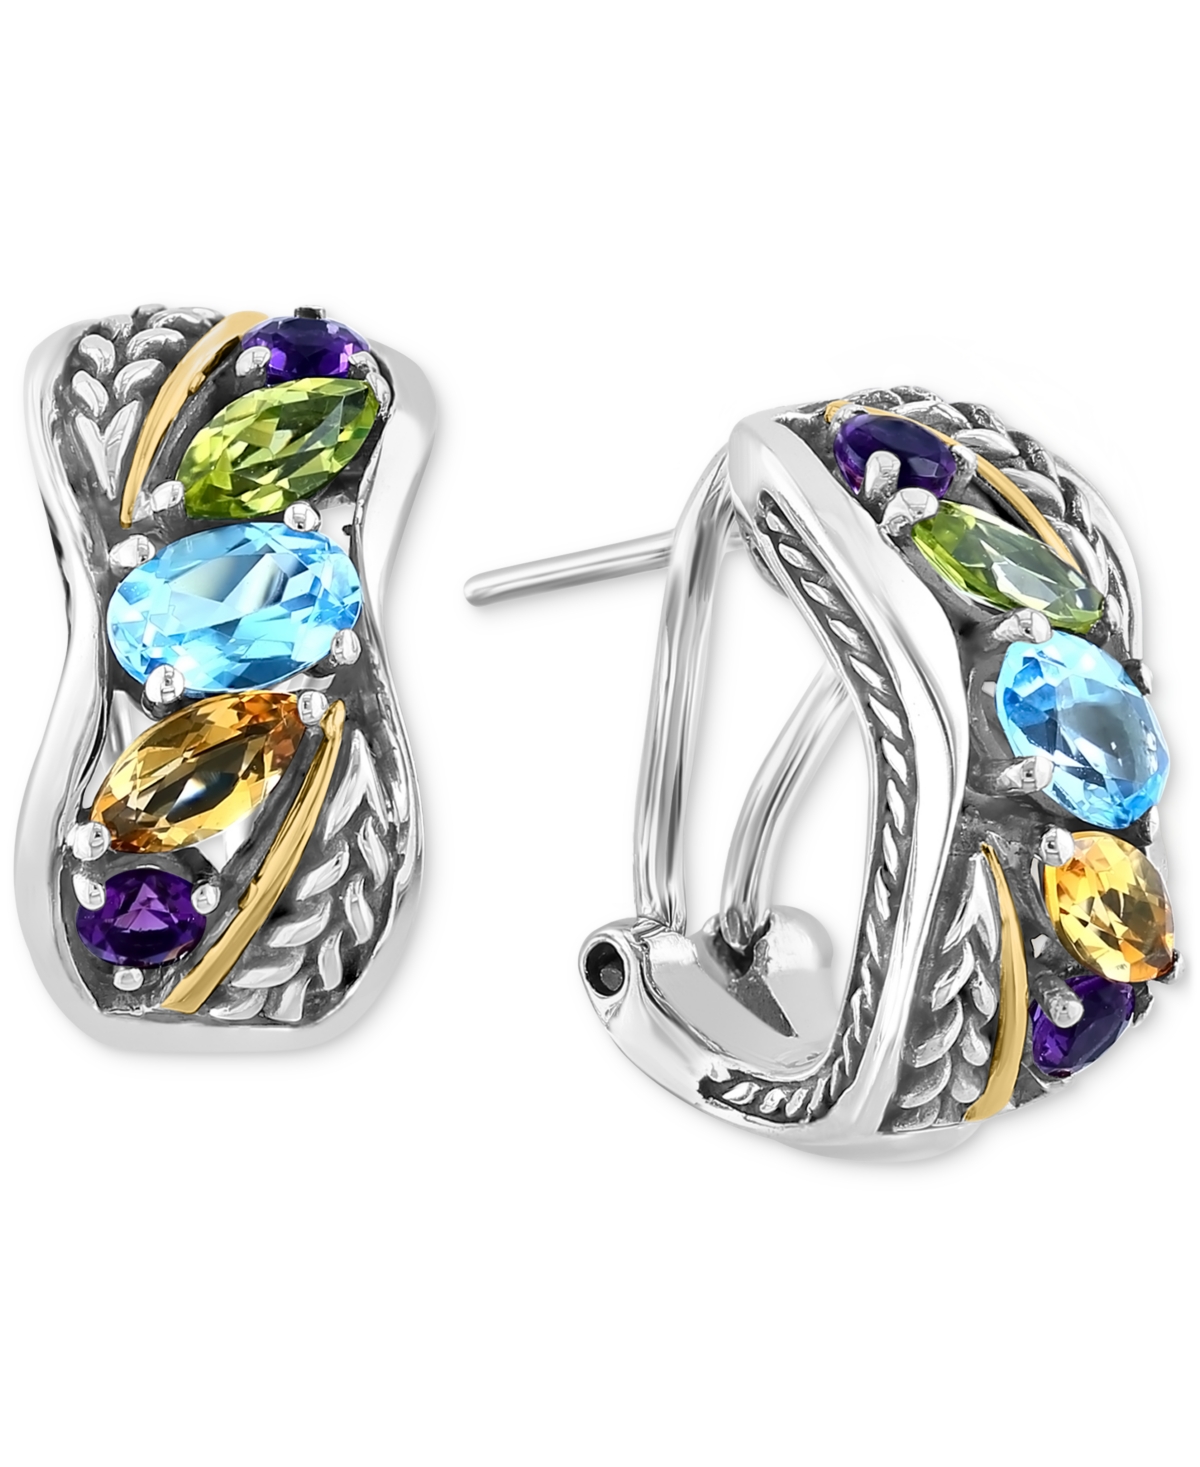 Effy Collection Effy Multi-gemstone Small Hoop Earrings (2-5/8 Ct. T.w.) In Sterling Silver & 18k Gold-plate In Gold Over Silver